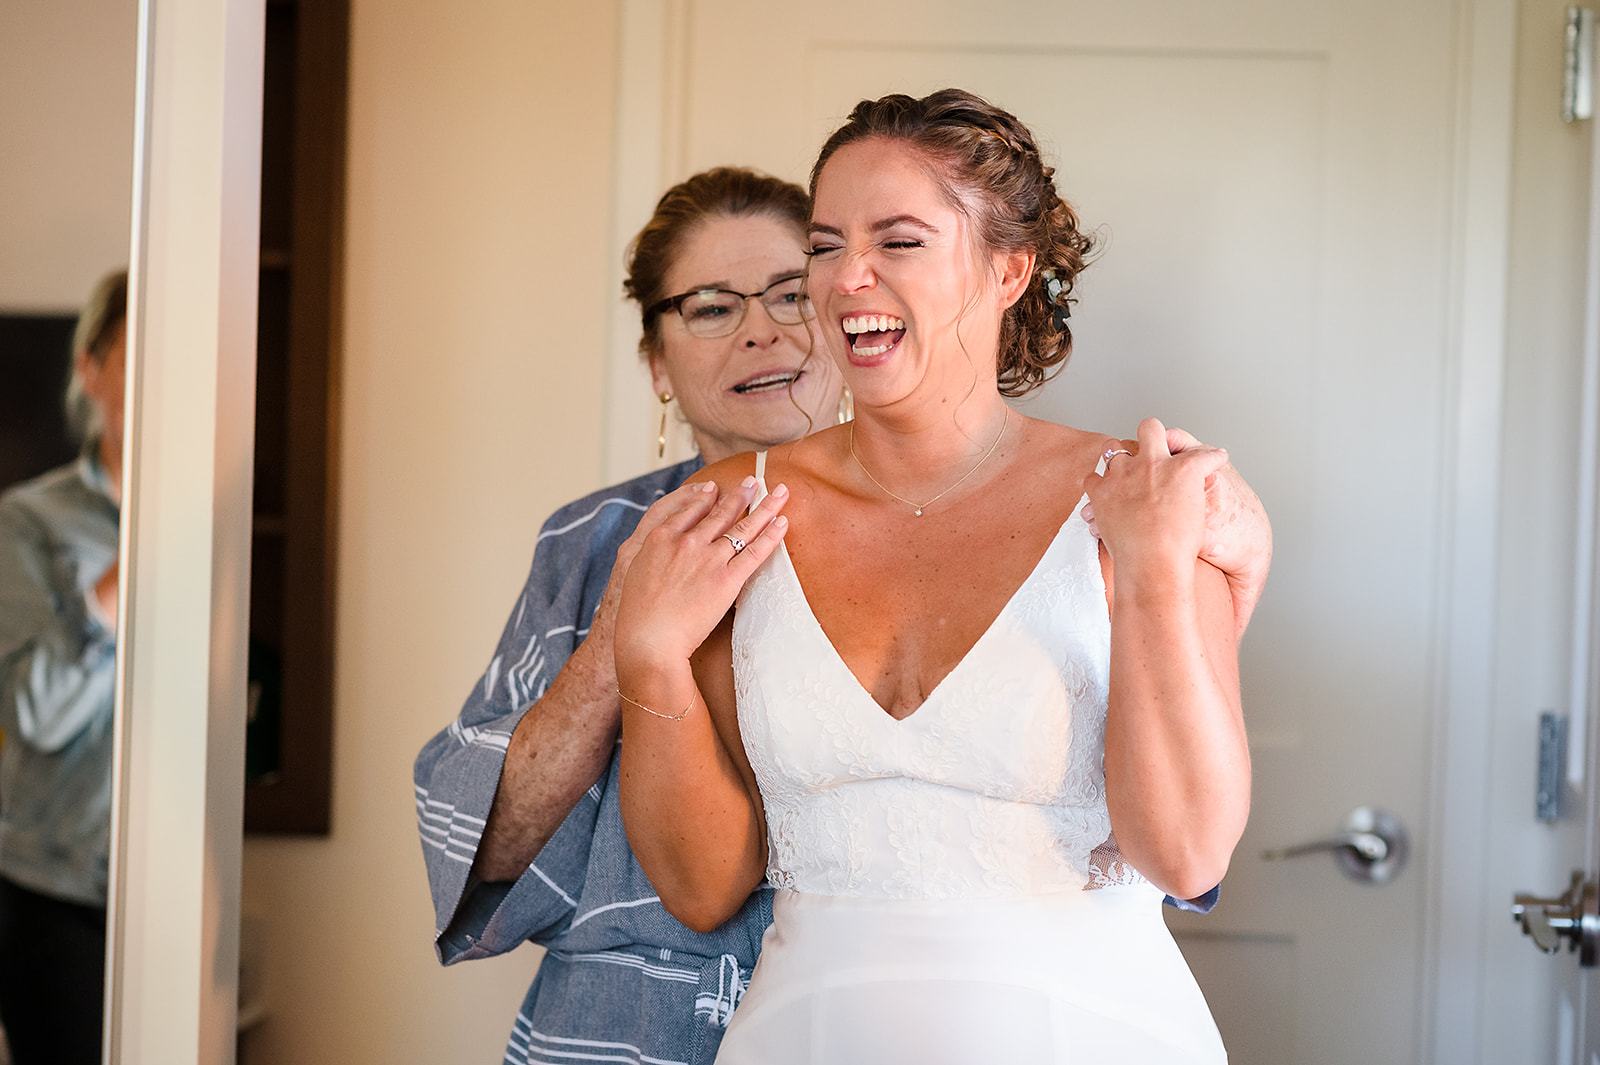 Bride getting ready with the help of her mom